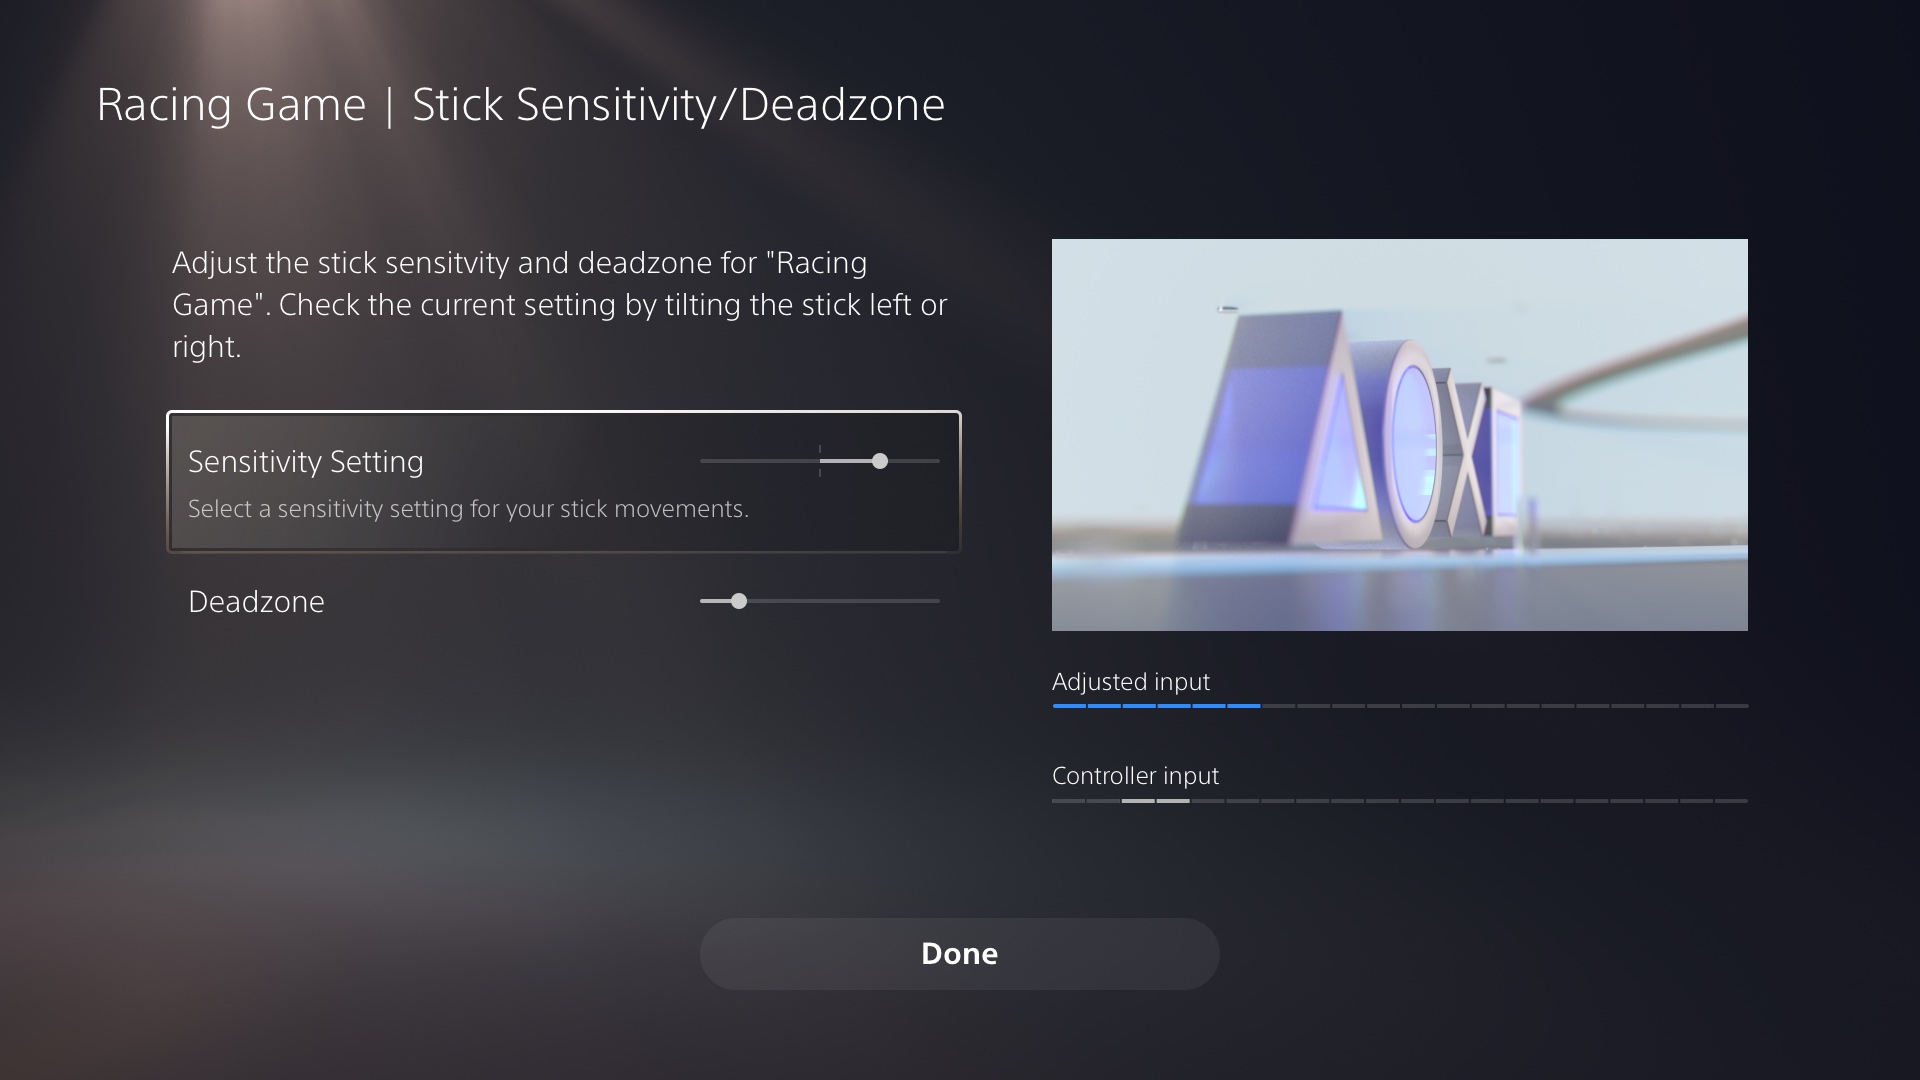  "Access controller UI image showing analog stick sensitivity and deadzone adjustment options within a user-created control profile"